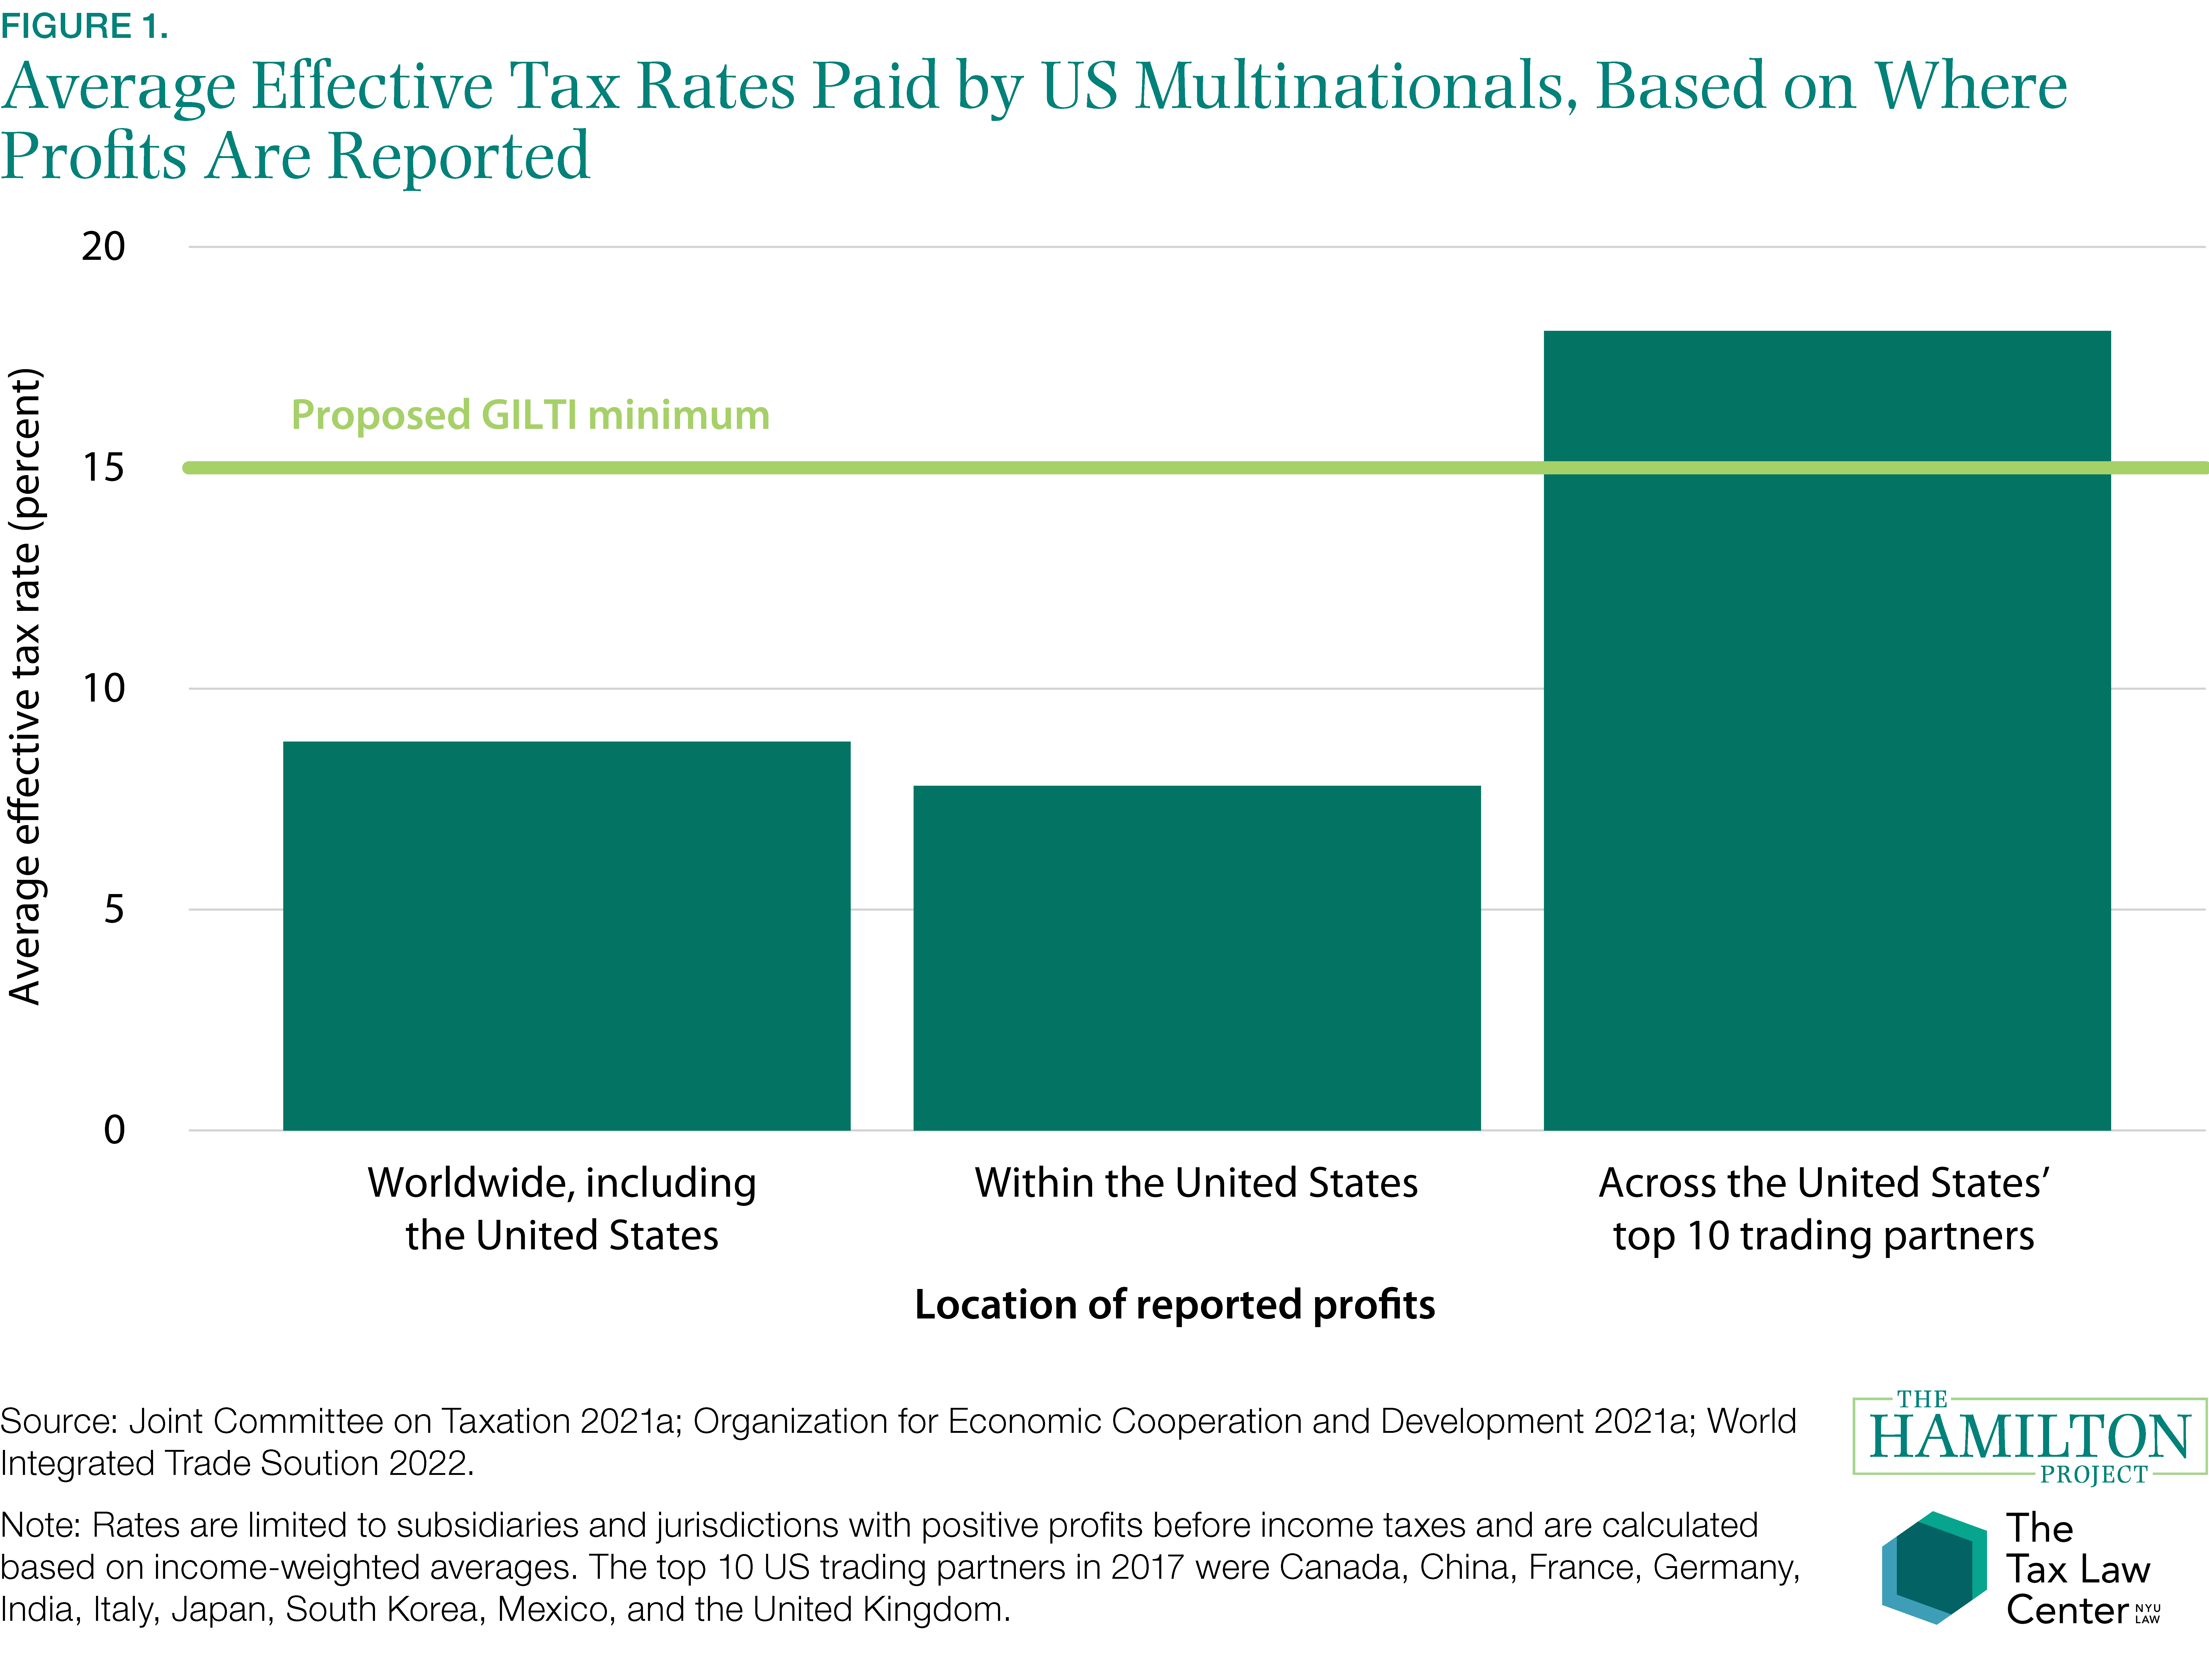 CFigure 1. Average Effective Tax Rates Paid by US Multinationals, Based on Where Profits Are Reported